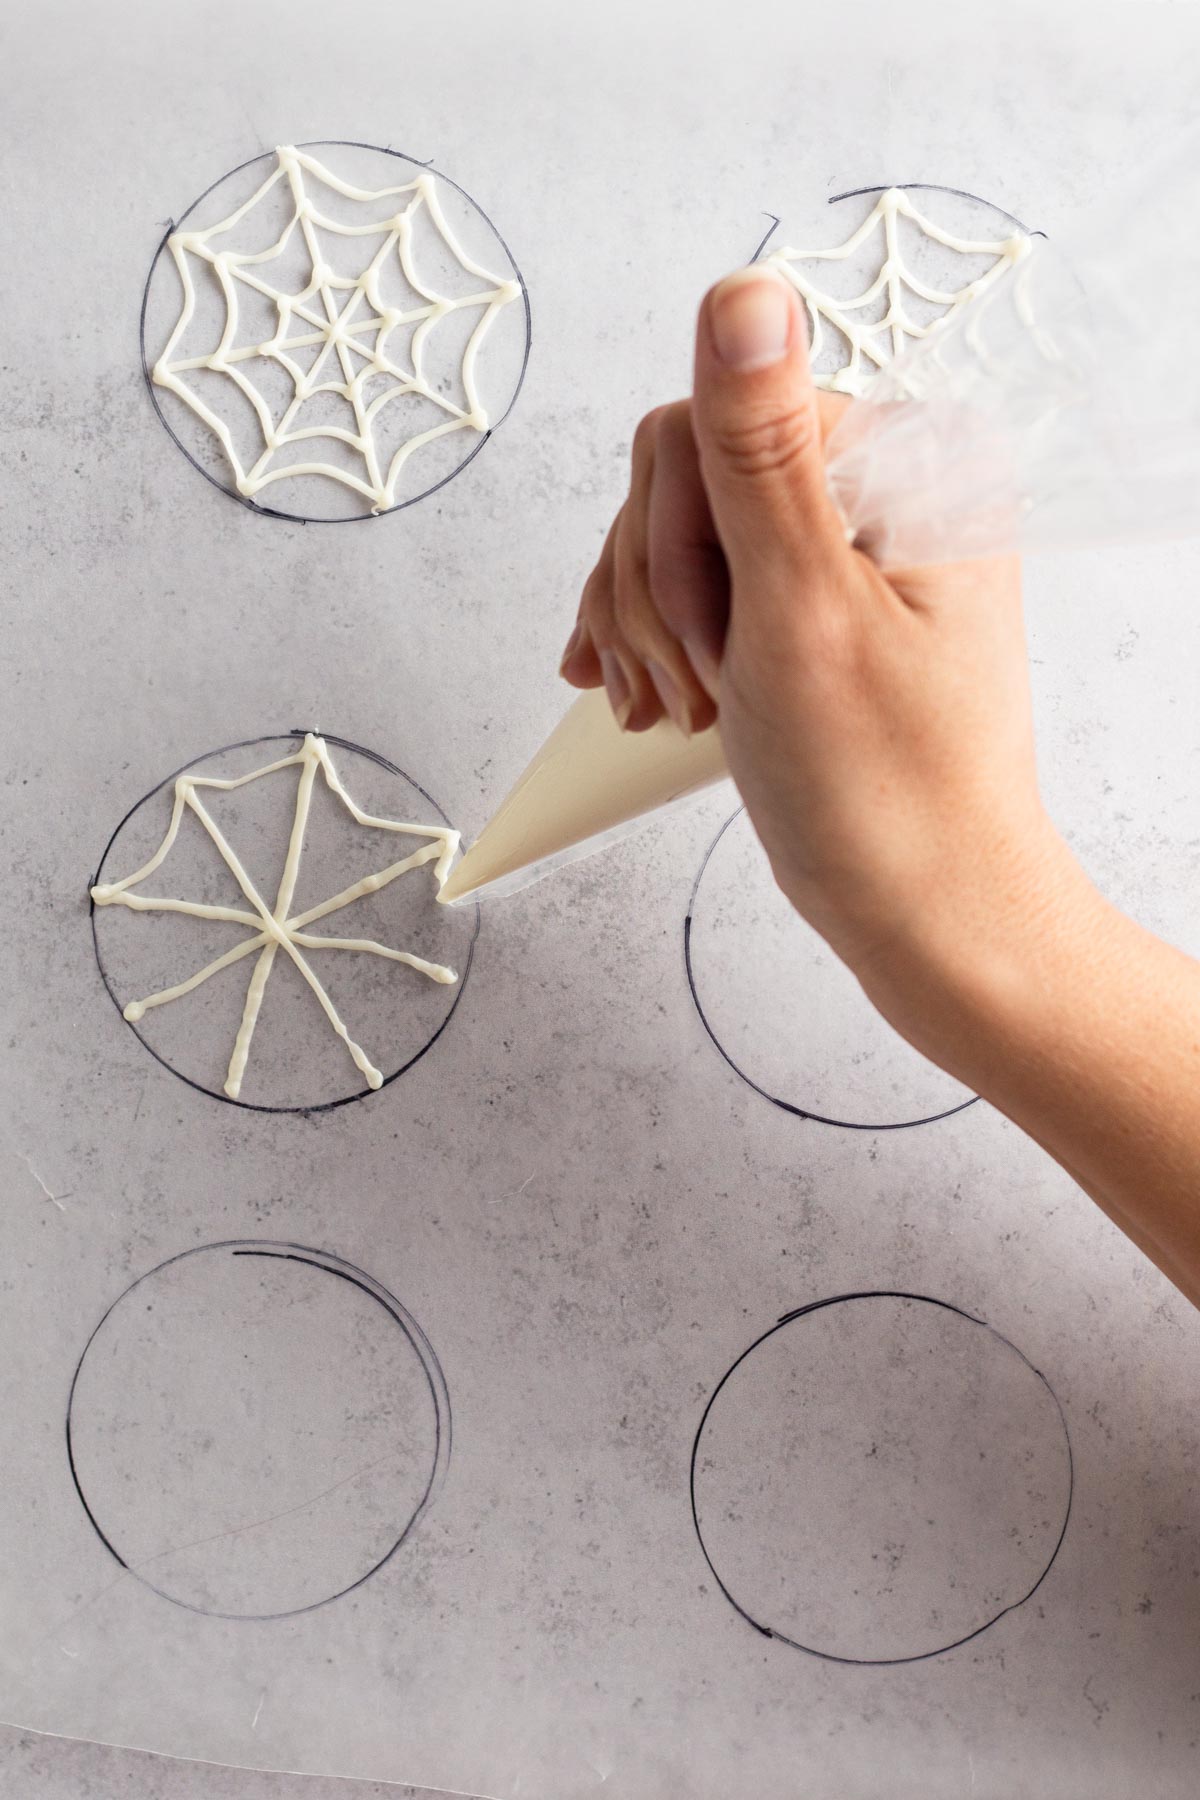 Hand piping swooped lined of melted white chocolate onto wax to create the outline of a spiderweb.